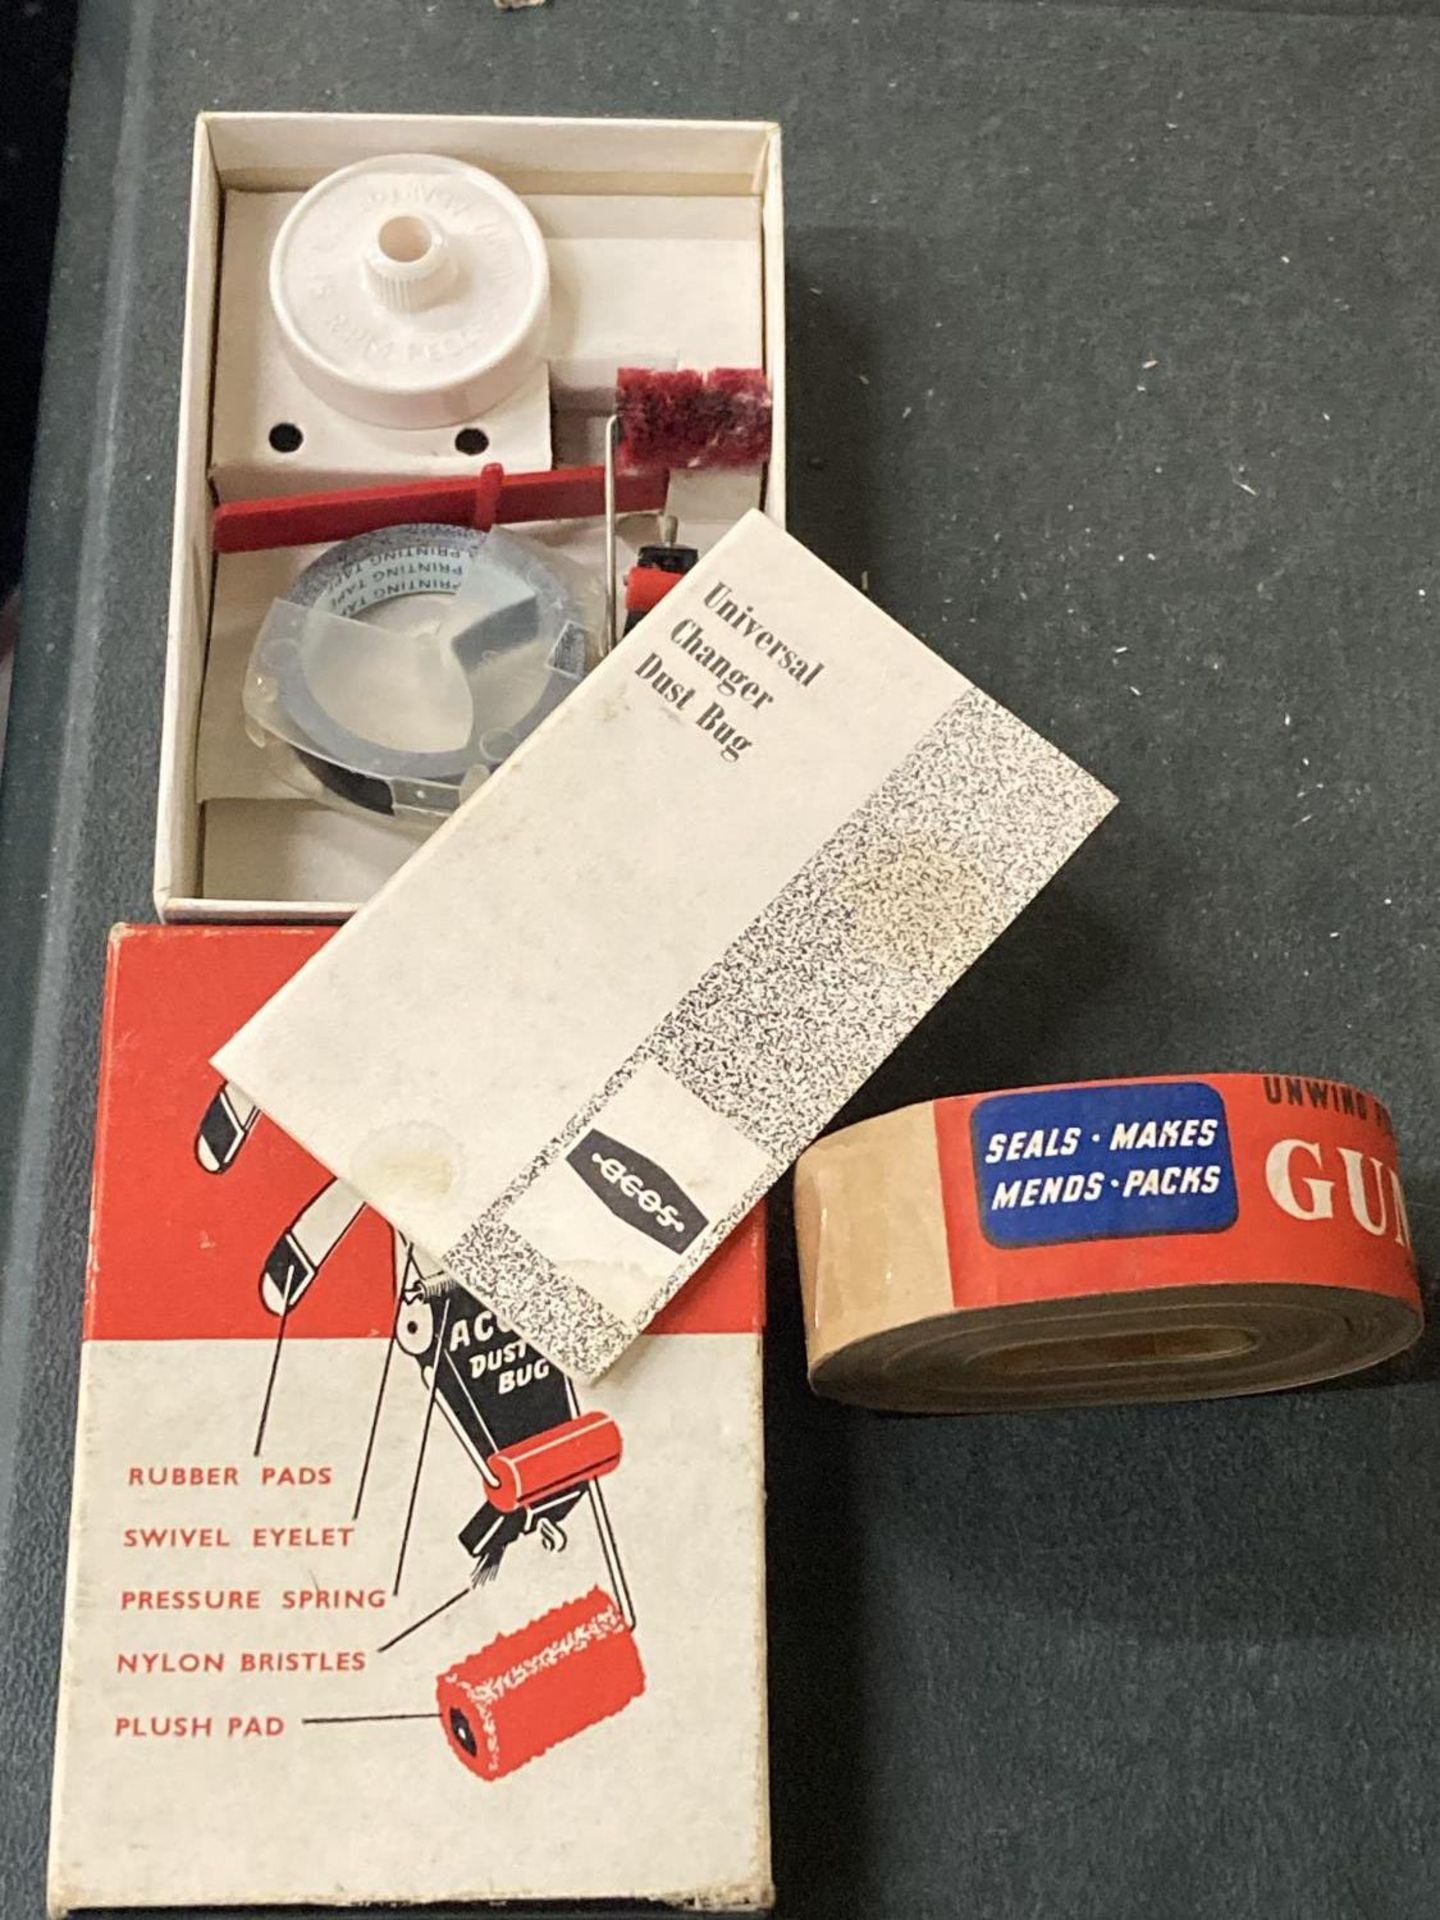 A VINTAGE BOXED UNIVERSAL DUST BUG CHANGER AND SEALS